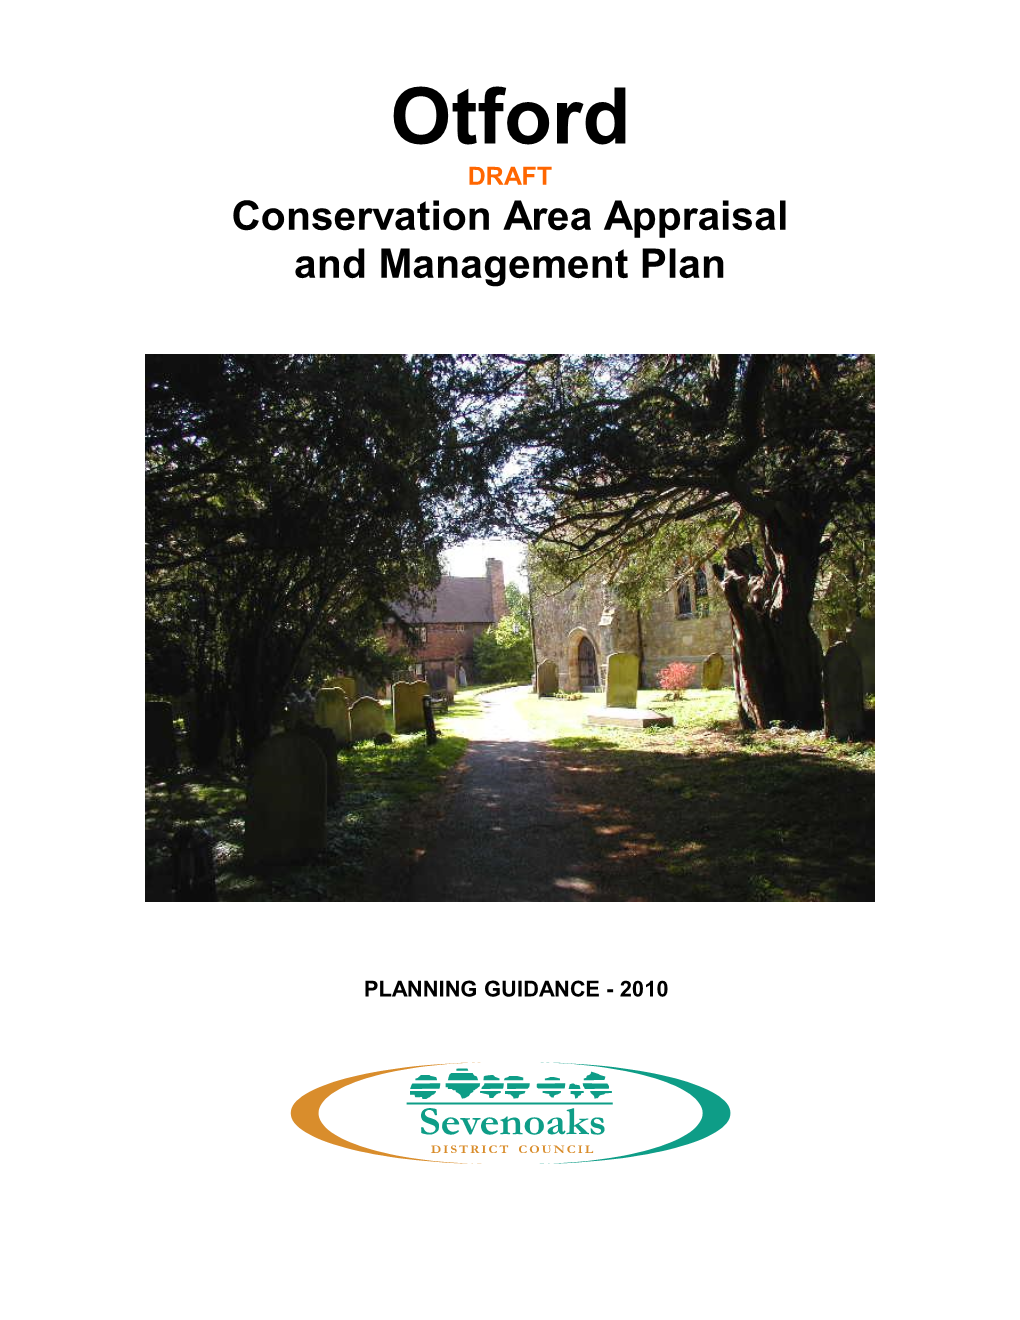 Otford DRAFT Conservation Area Appraisal and Management Plan